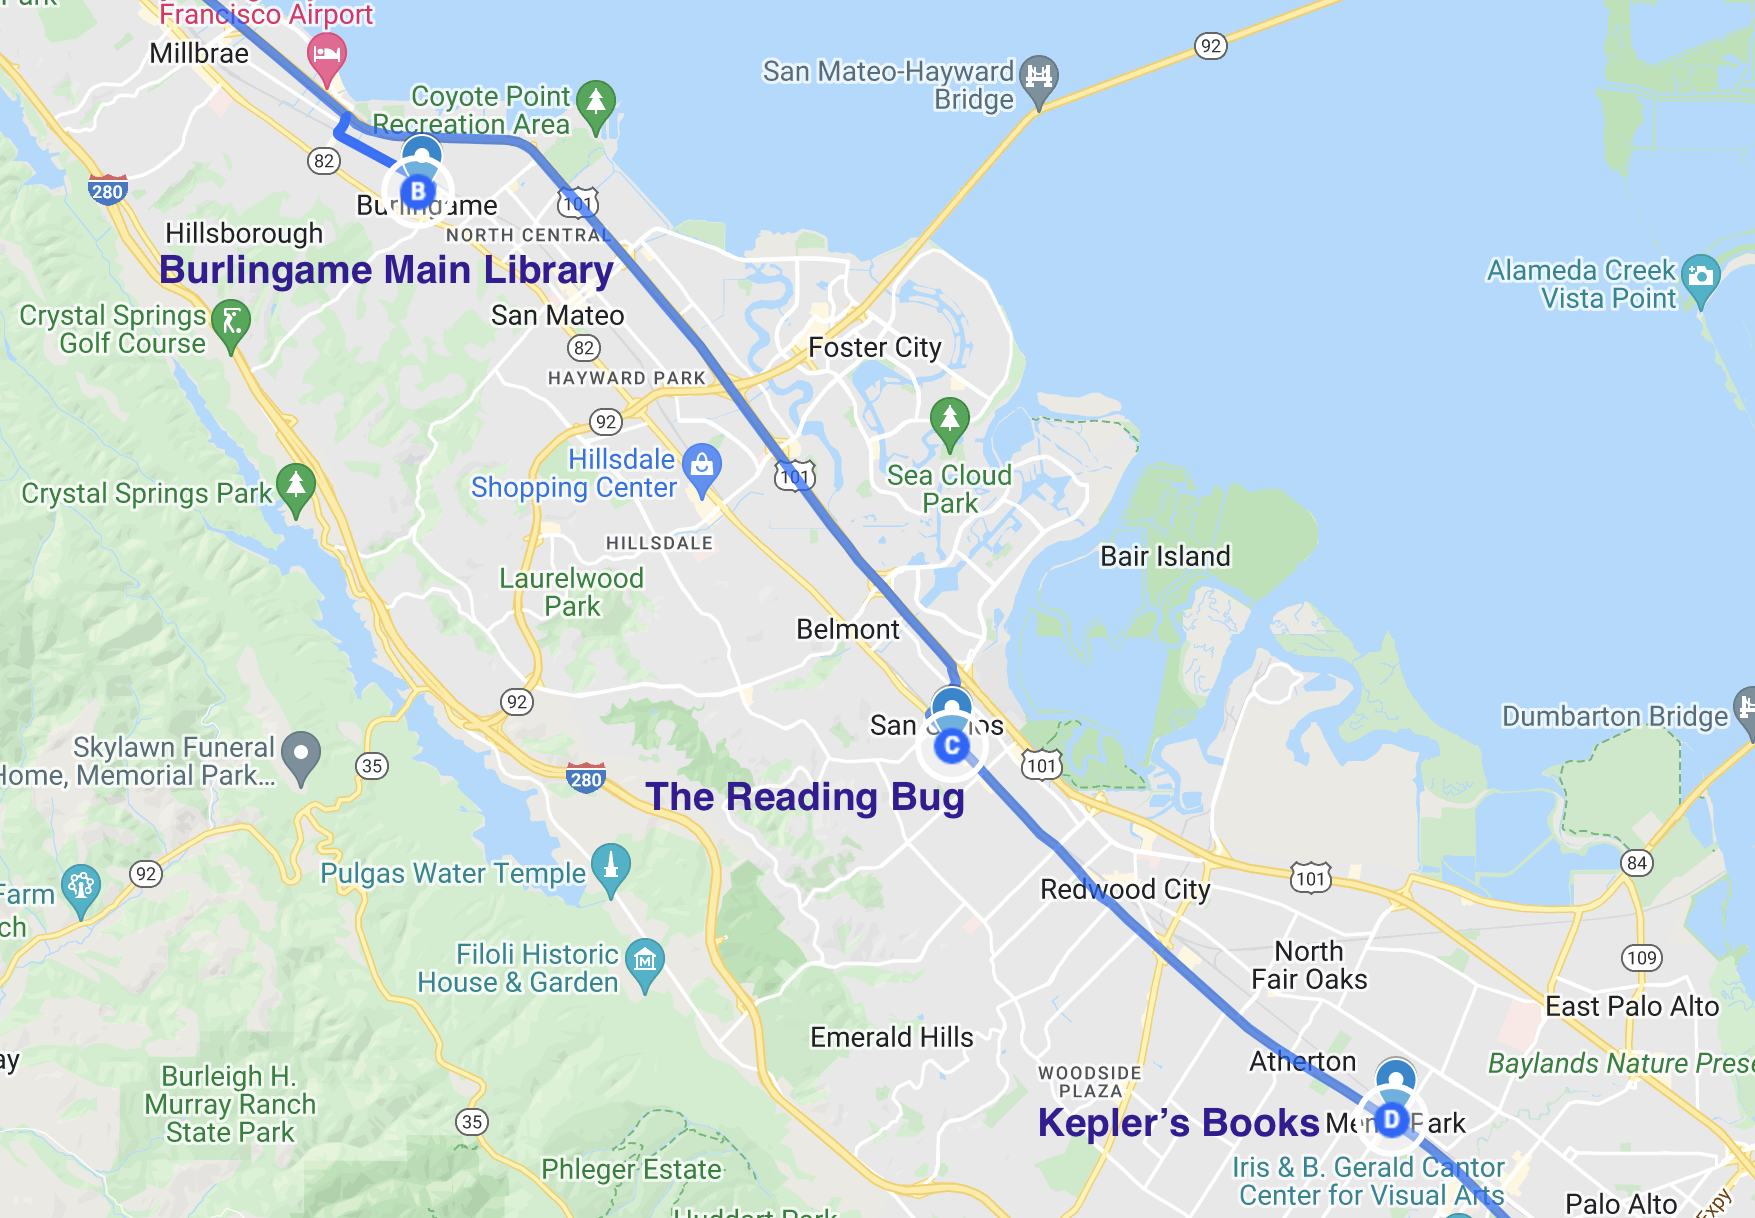 map of literary stops in san mateo county california